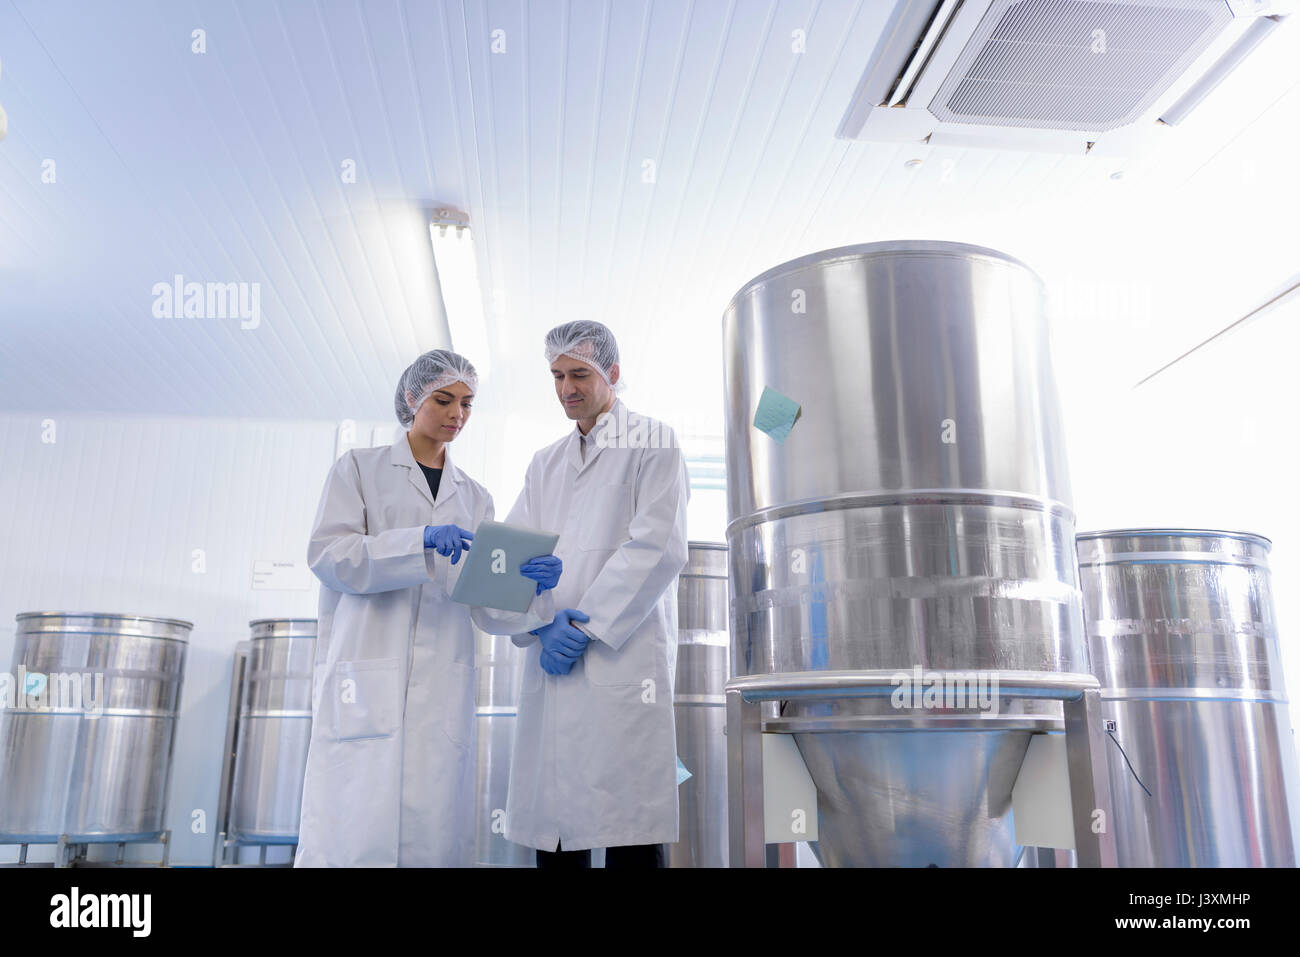 Worker in discussion by vat in pharmaceutical factory Stock Photo